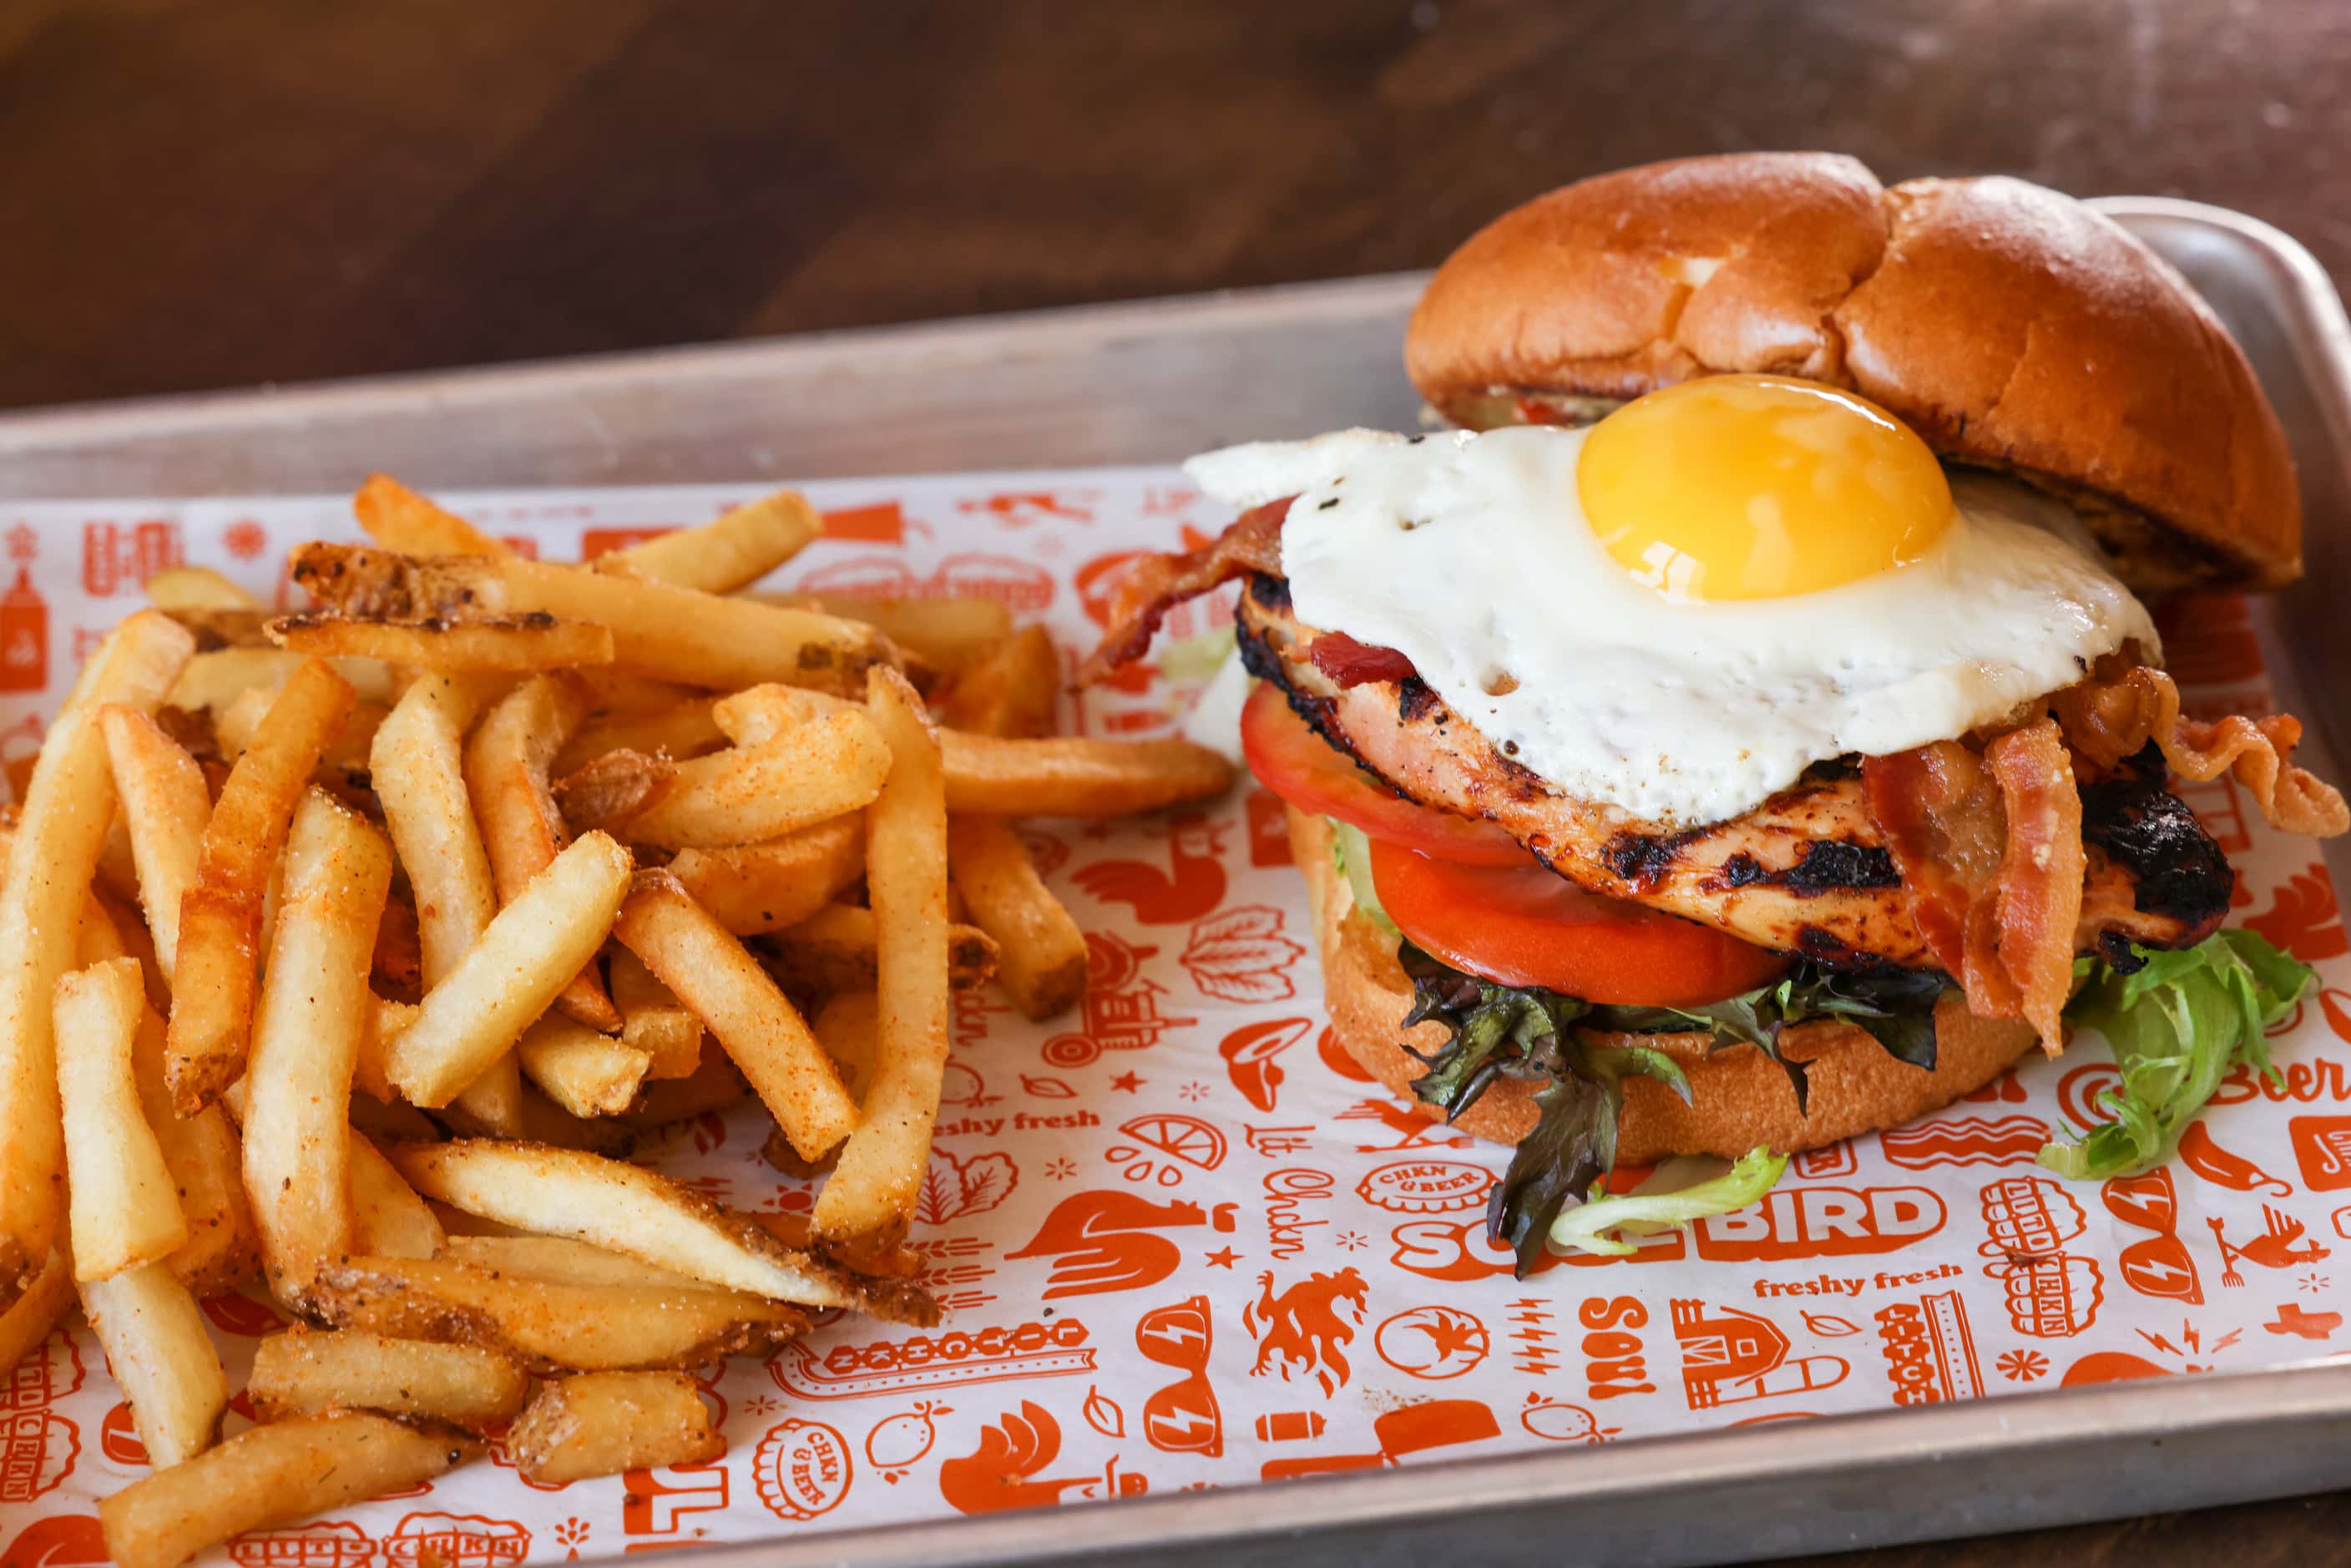 Soul Bird menu options include The Shack burger, made with Applewood smoked bacon, greens,...